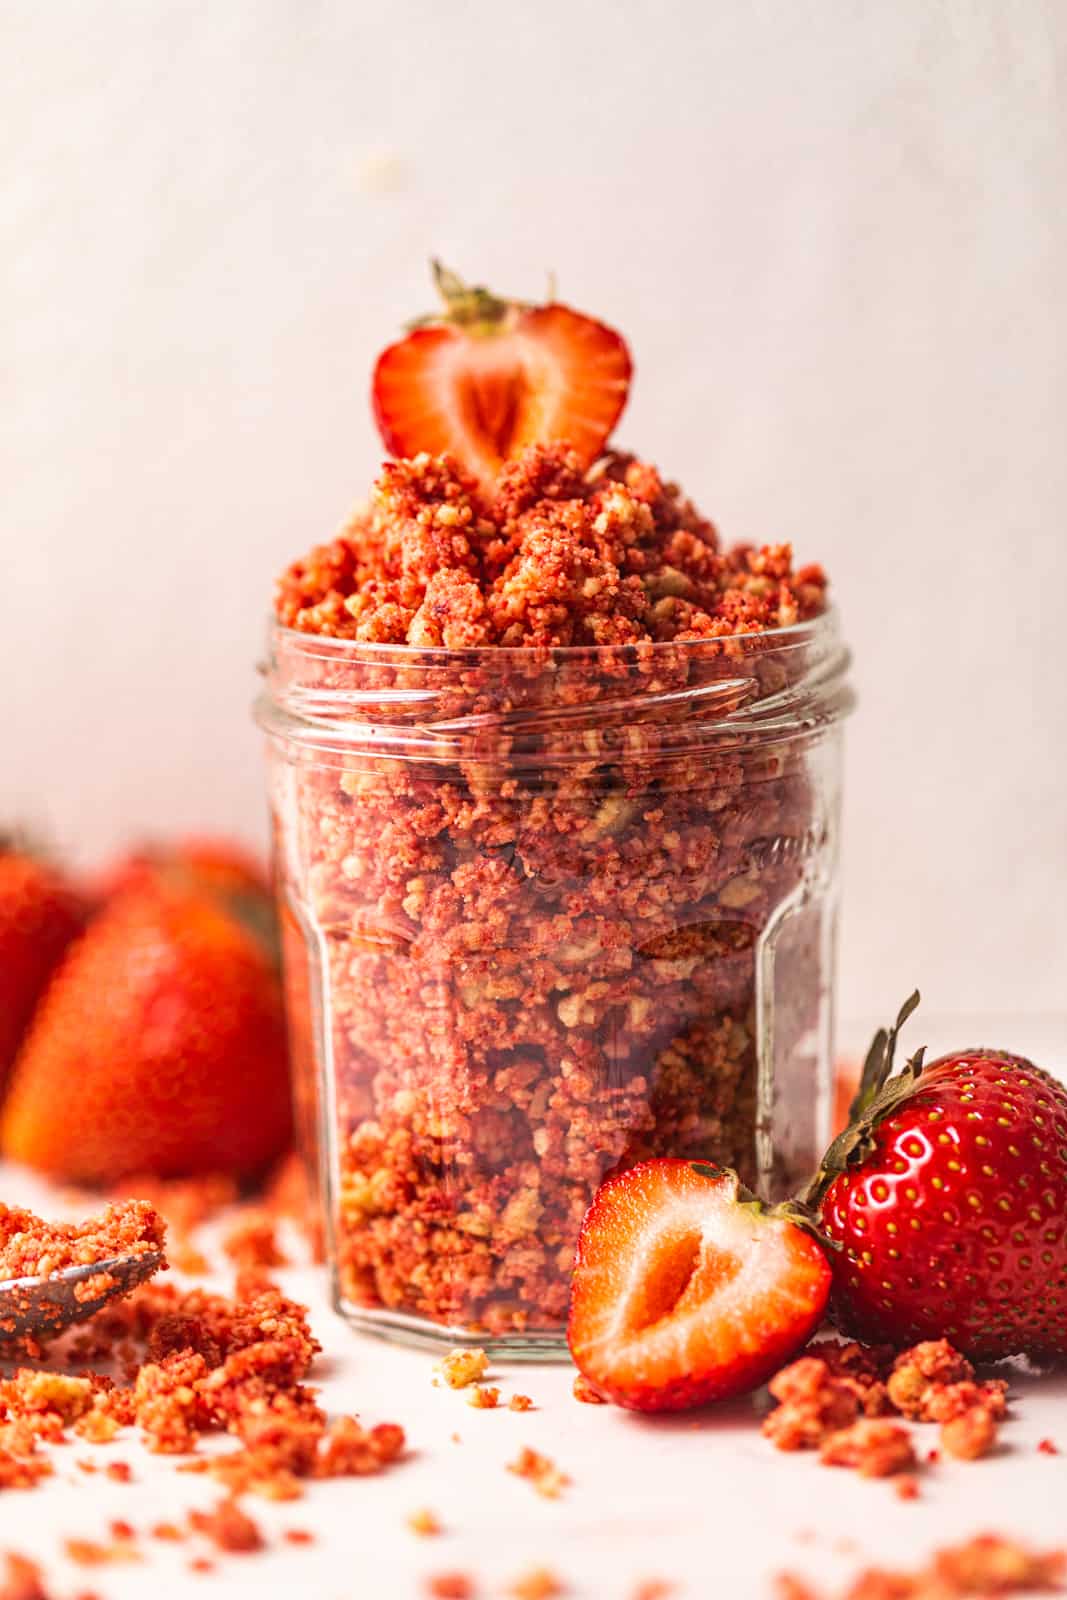 strawberry shortcake crumbles in a jar topped with strawberries.